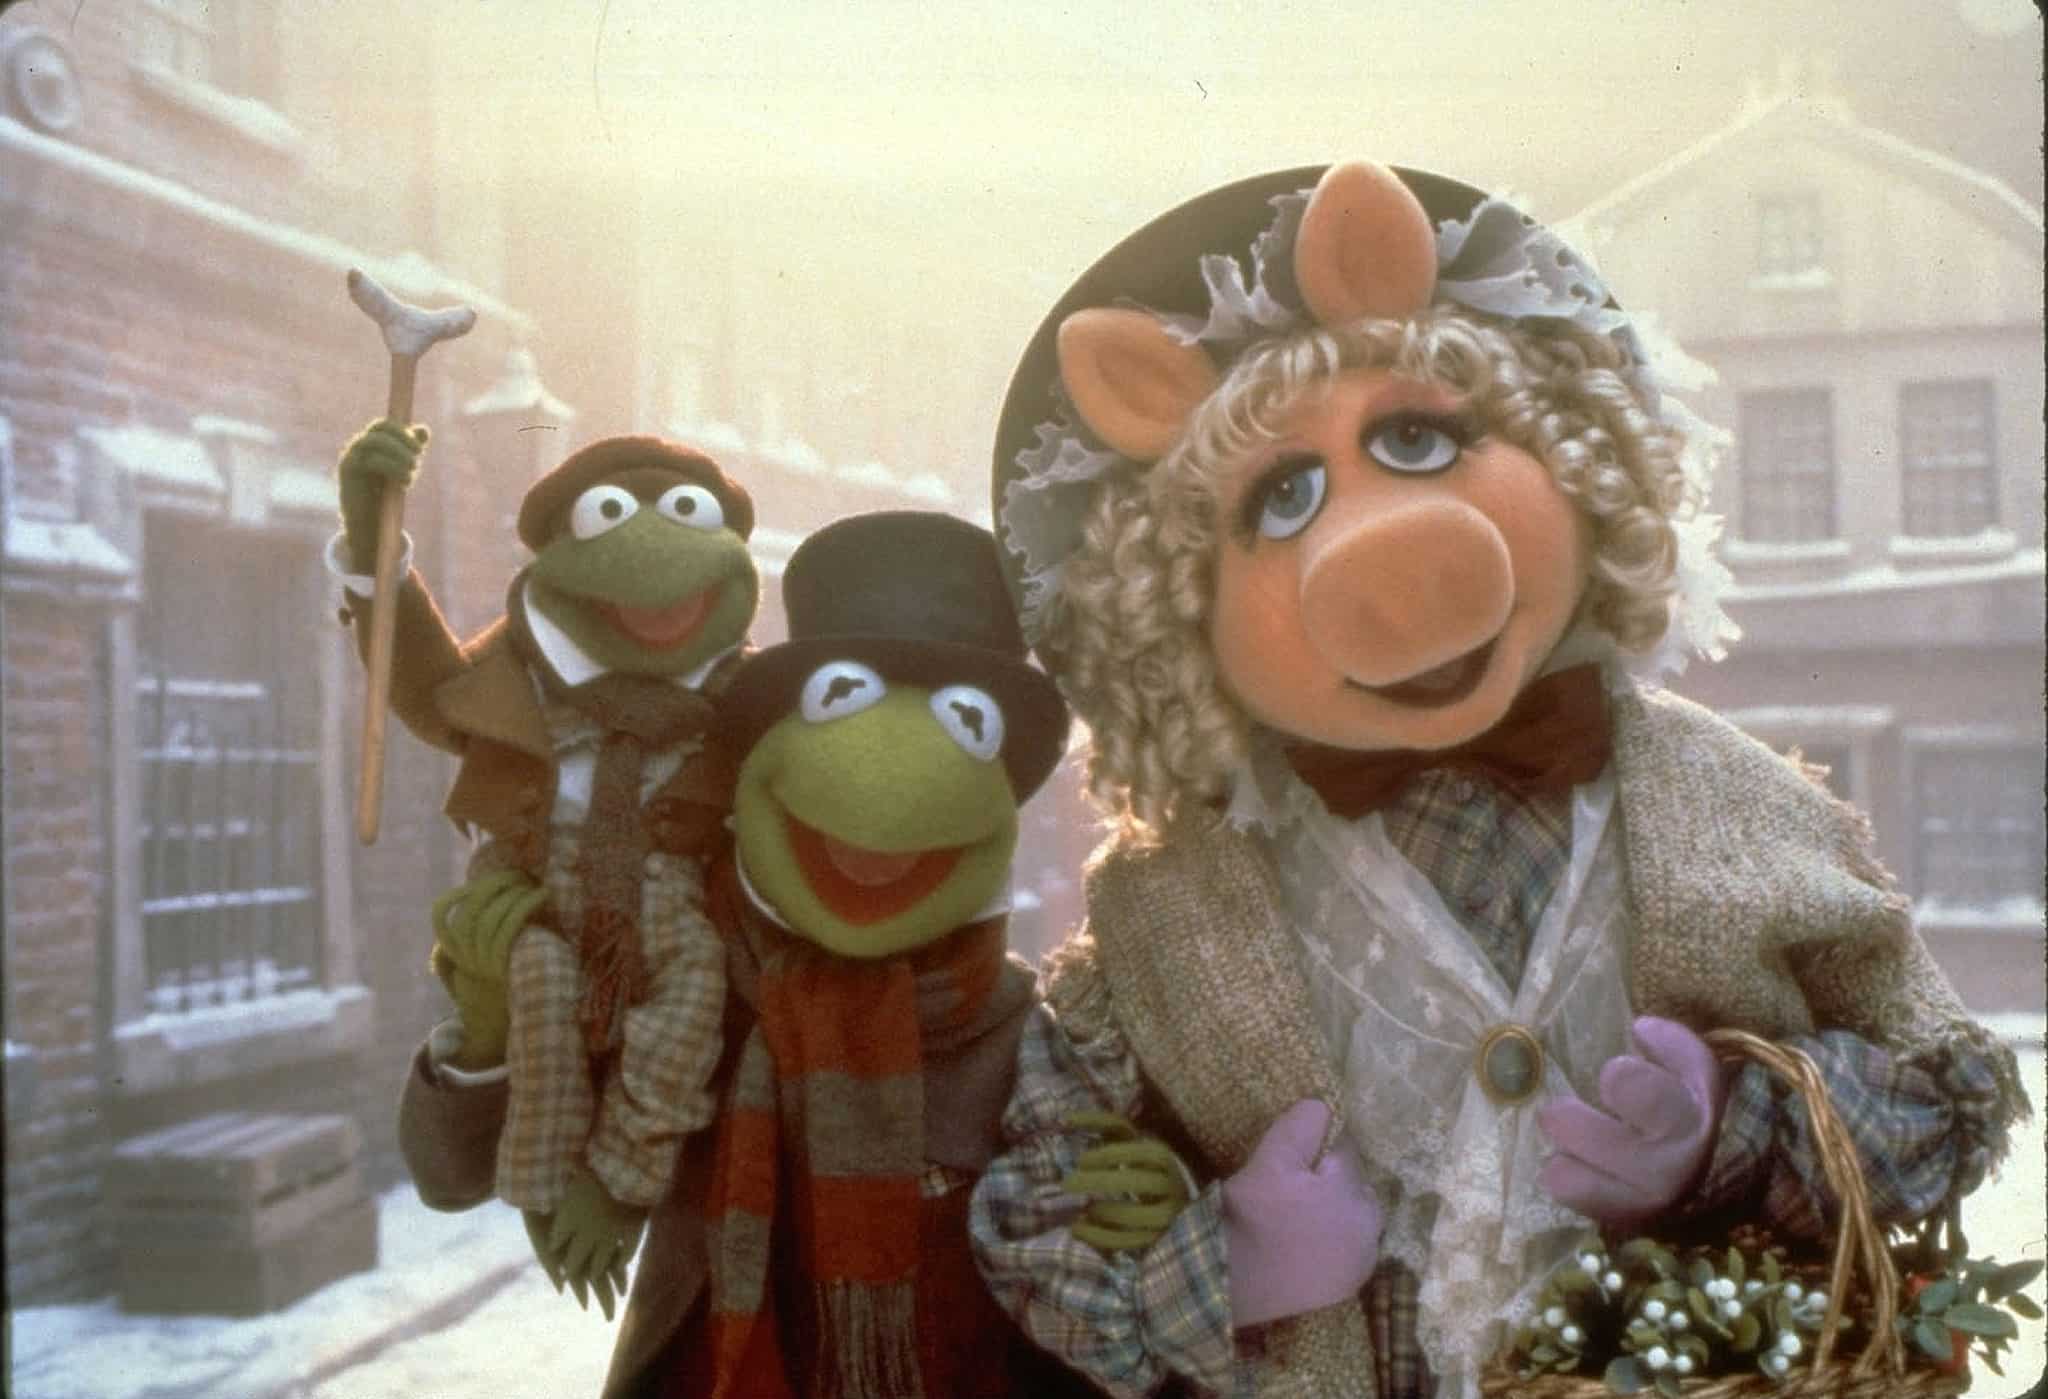 Robin the Frog, Kermit the Frog, and Miss Piggy in Victorian dress in this image from Jim Henson Productions.